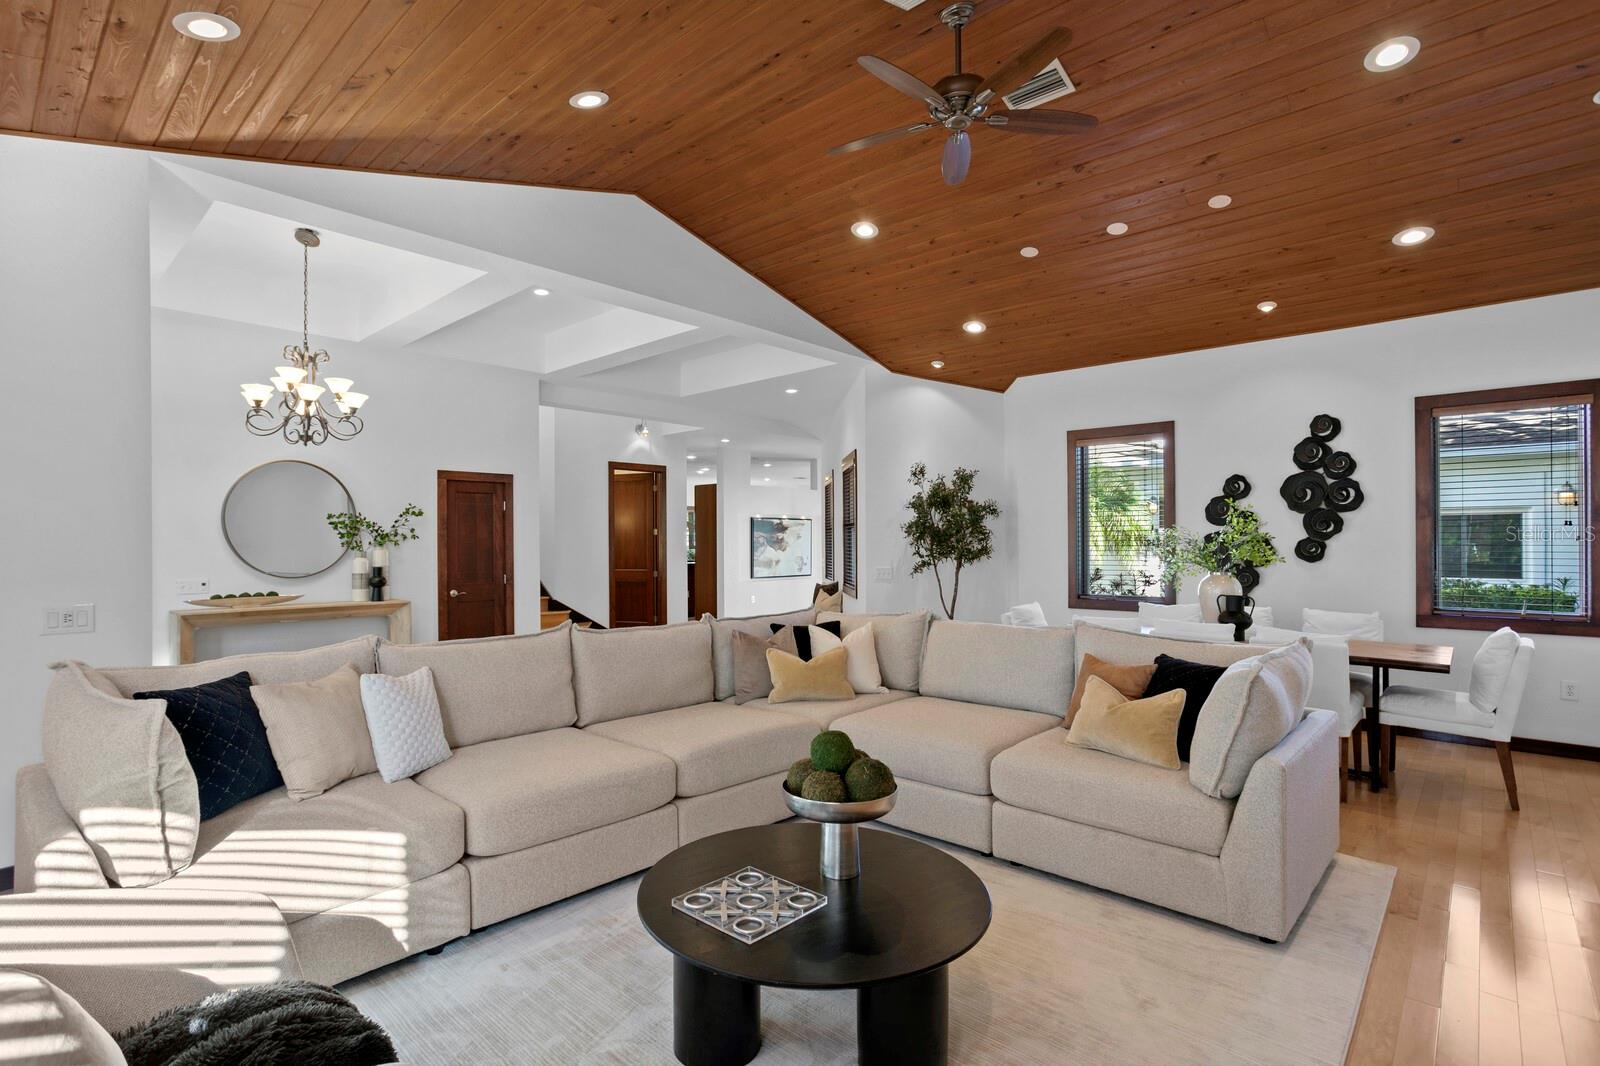 There are decorative wood ceilings in the living and dining rooms